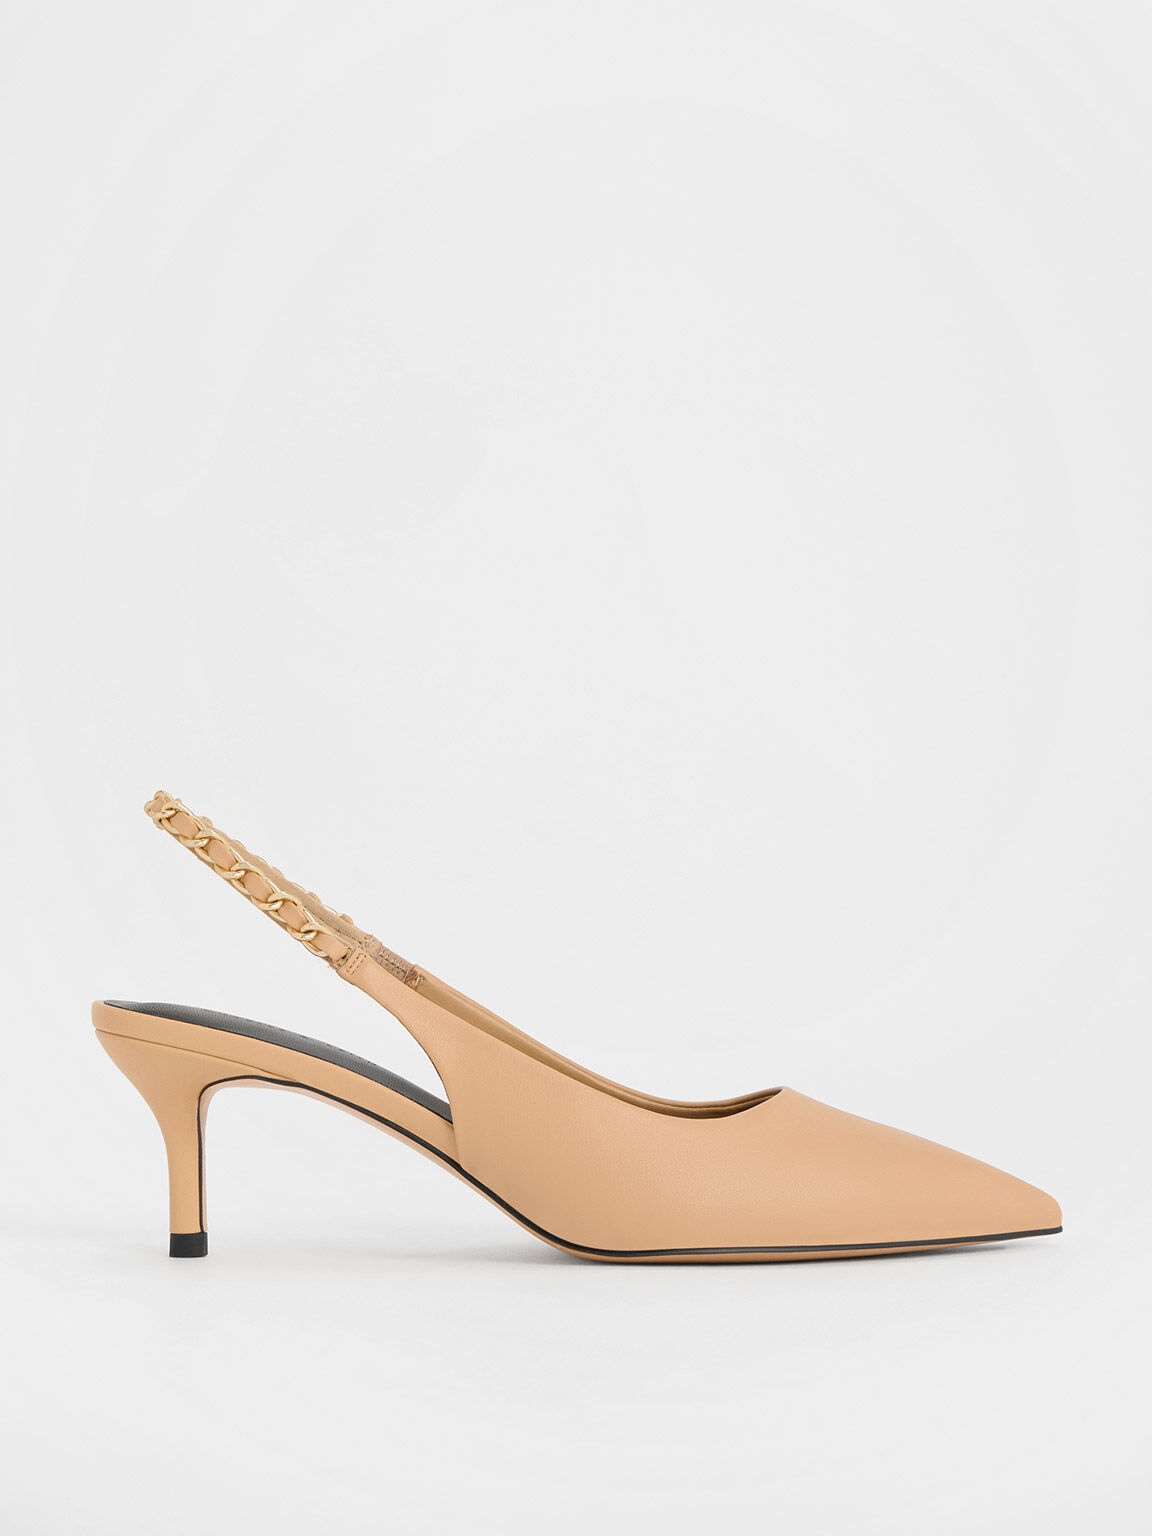 White Braided-Chain Slingback Pumps - CHARLES & KEITH US